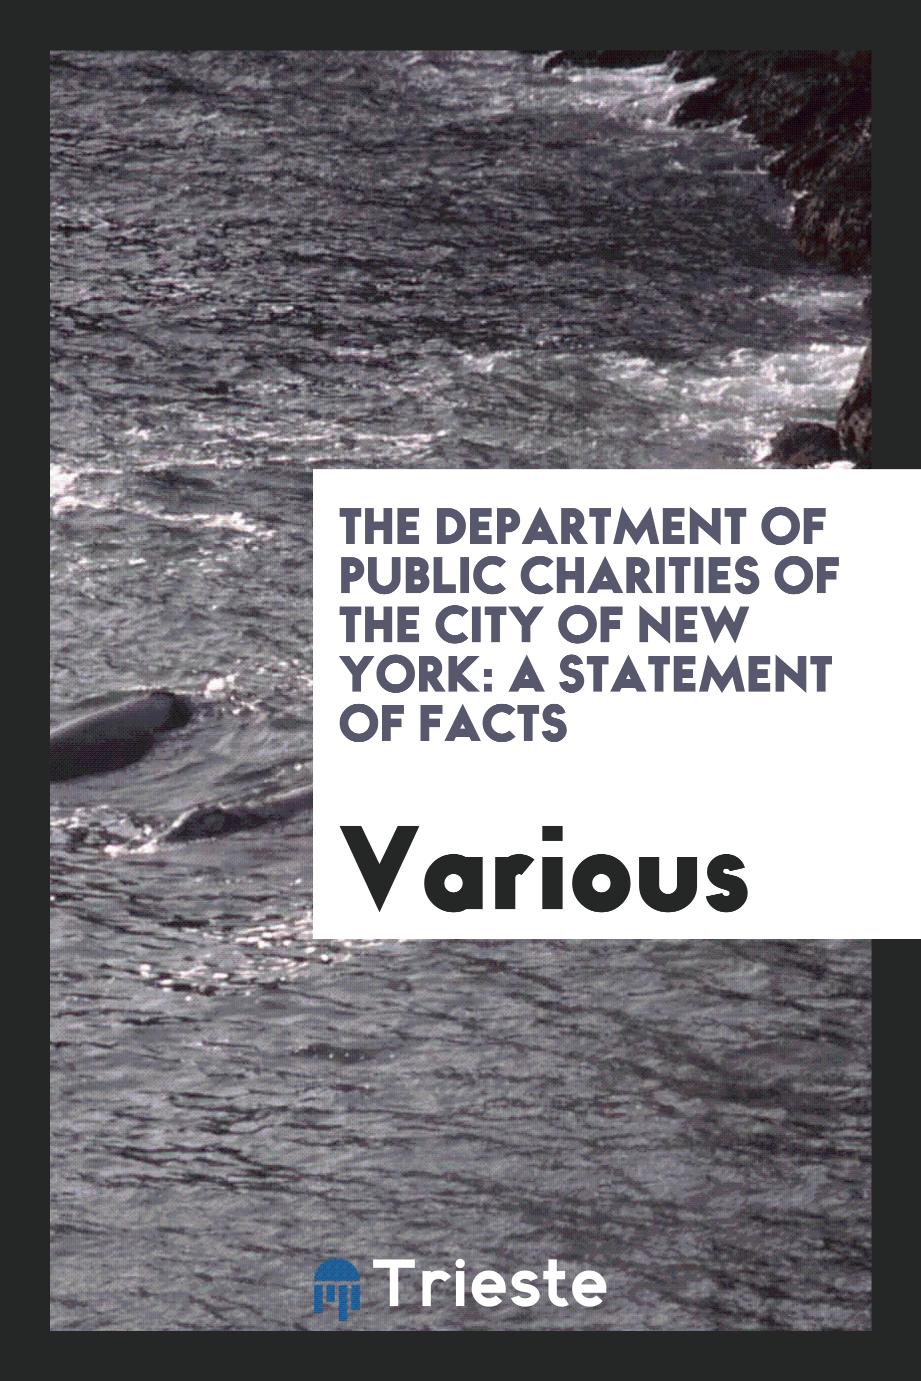 The Department of Public Charities of the City of New York: A Statement of Facts